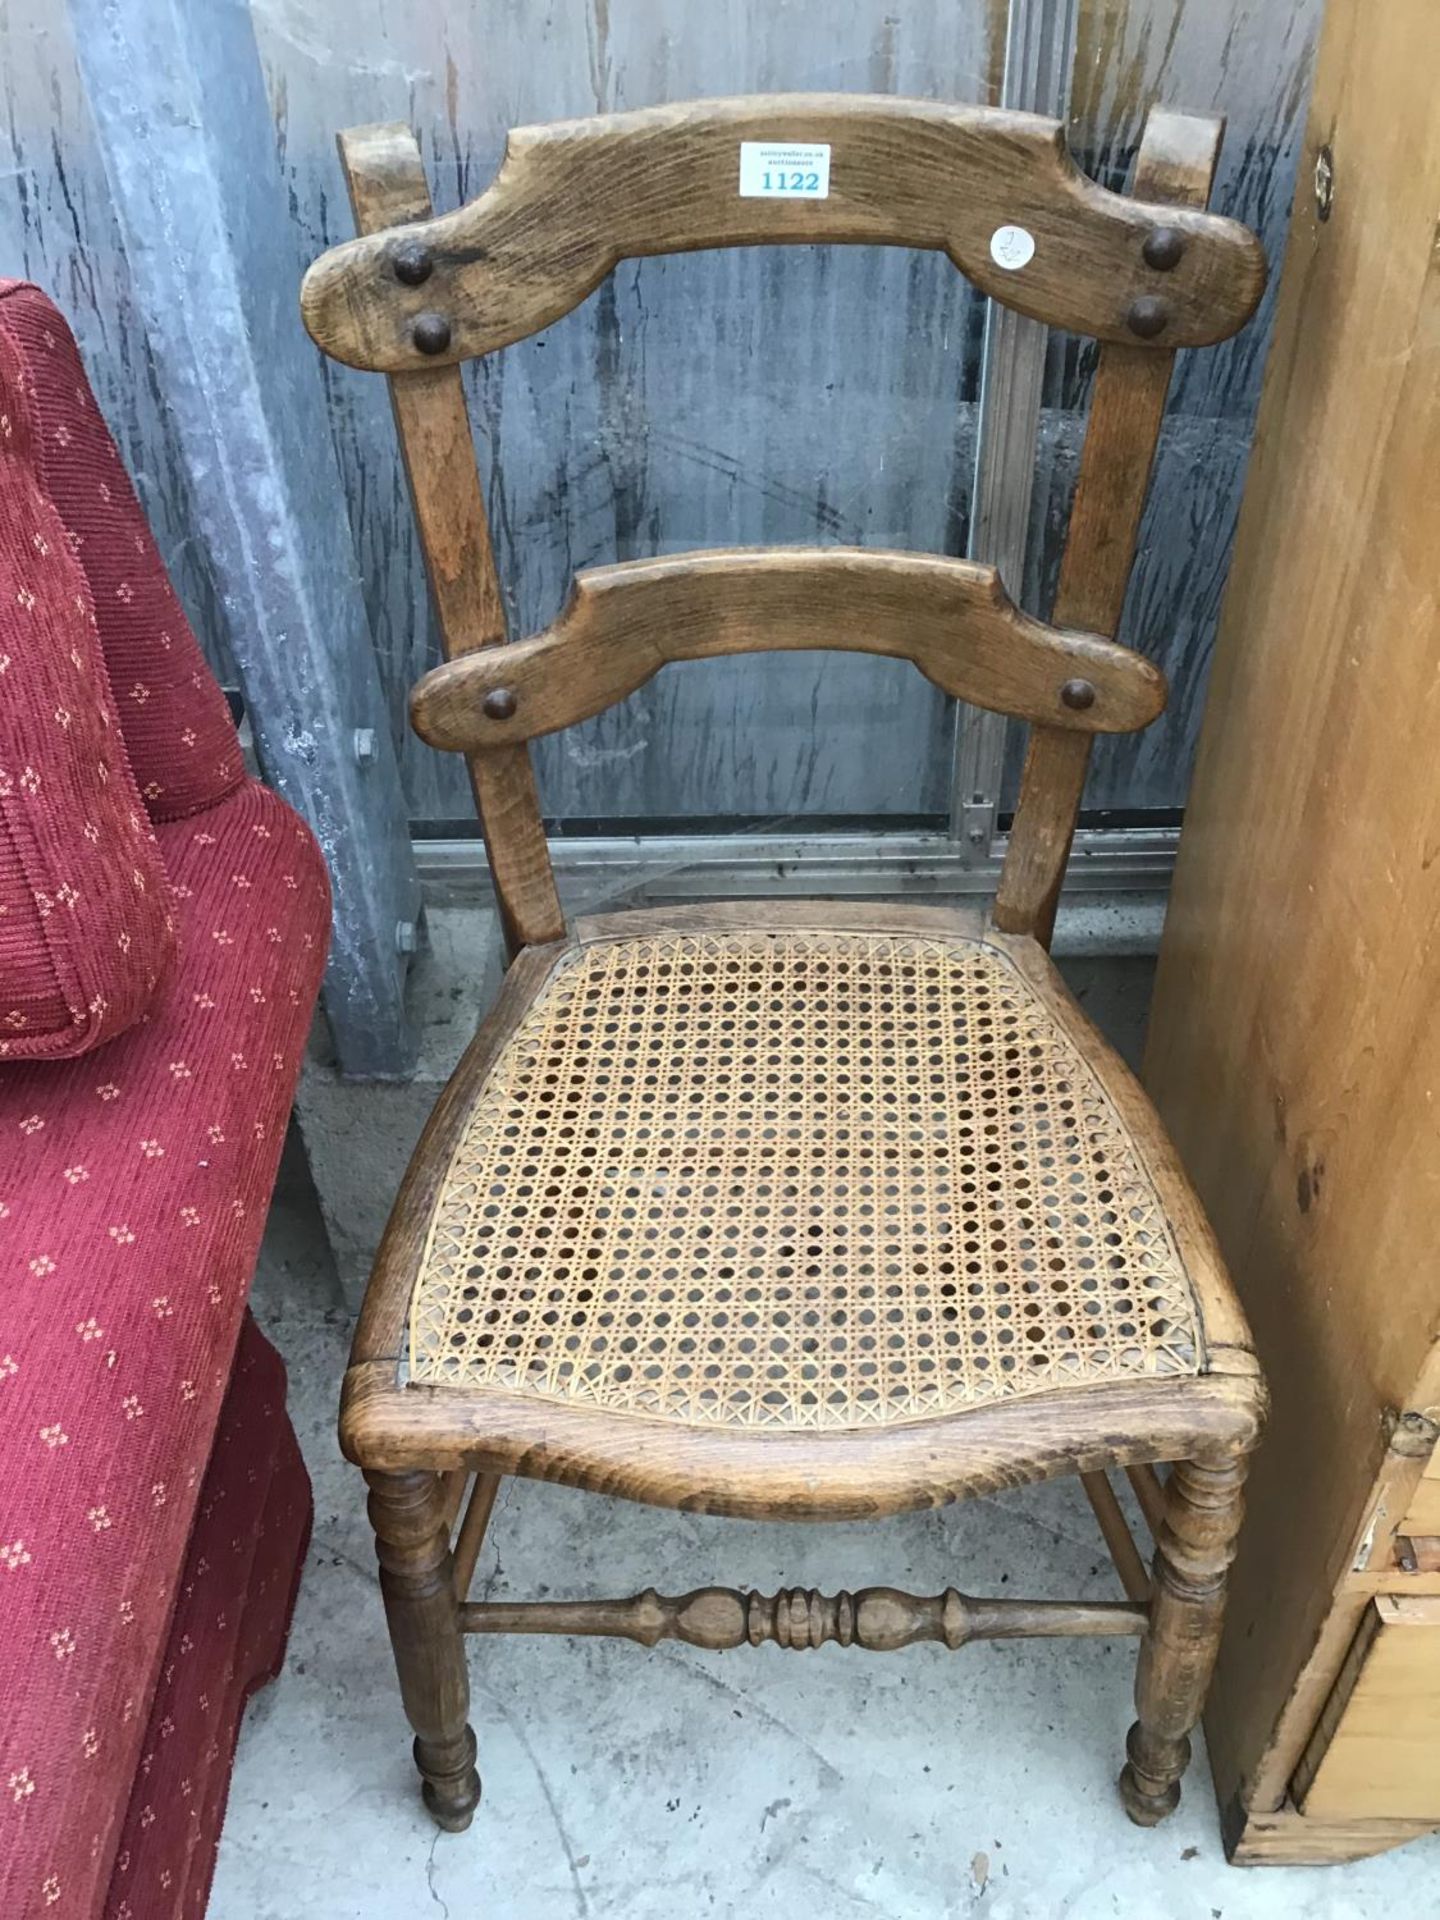 A VINTAGE OAK CHAIR WITH RATTAN SEAT